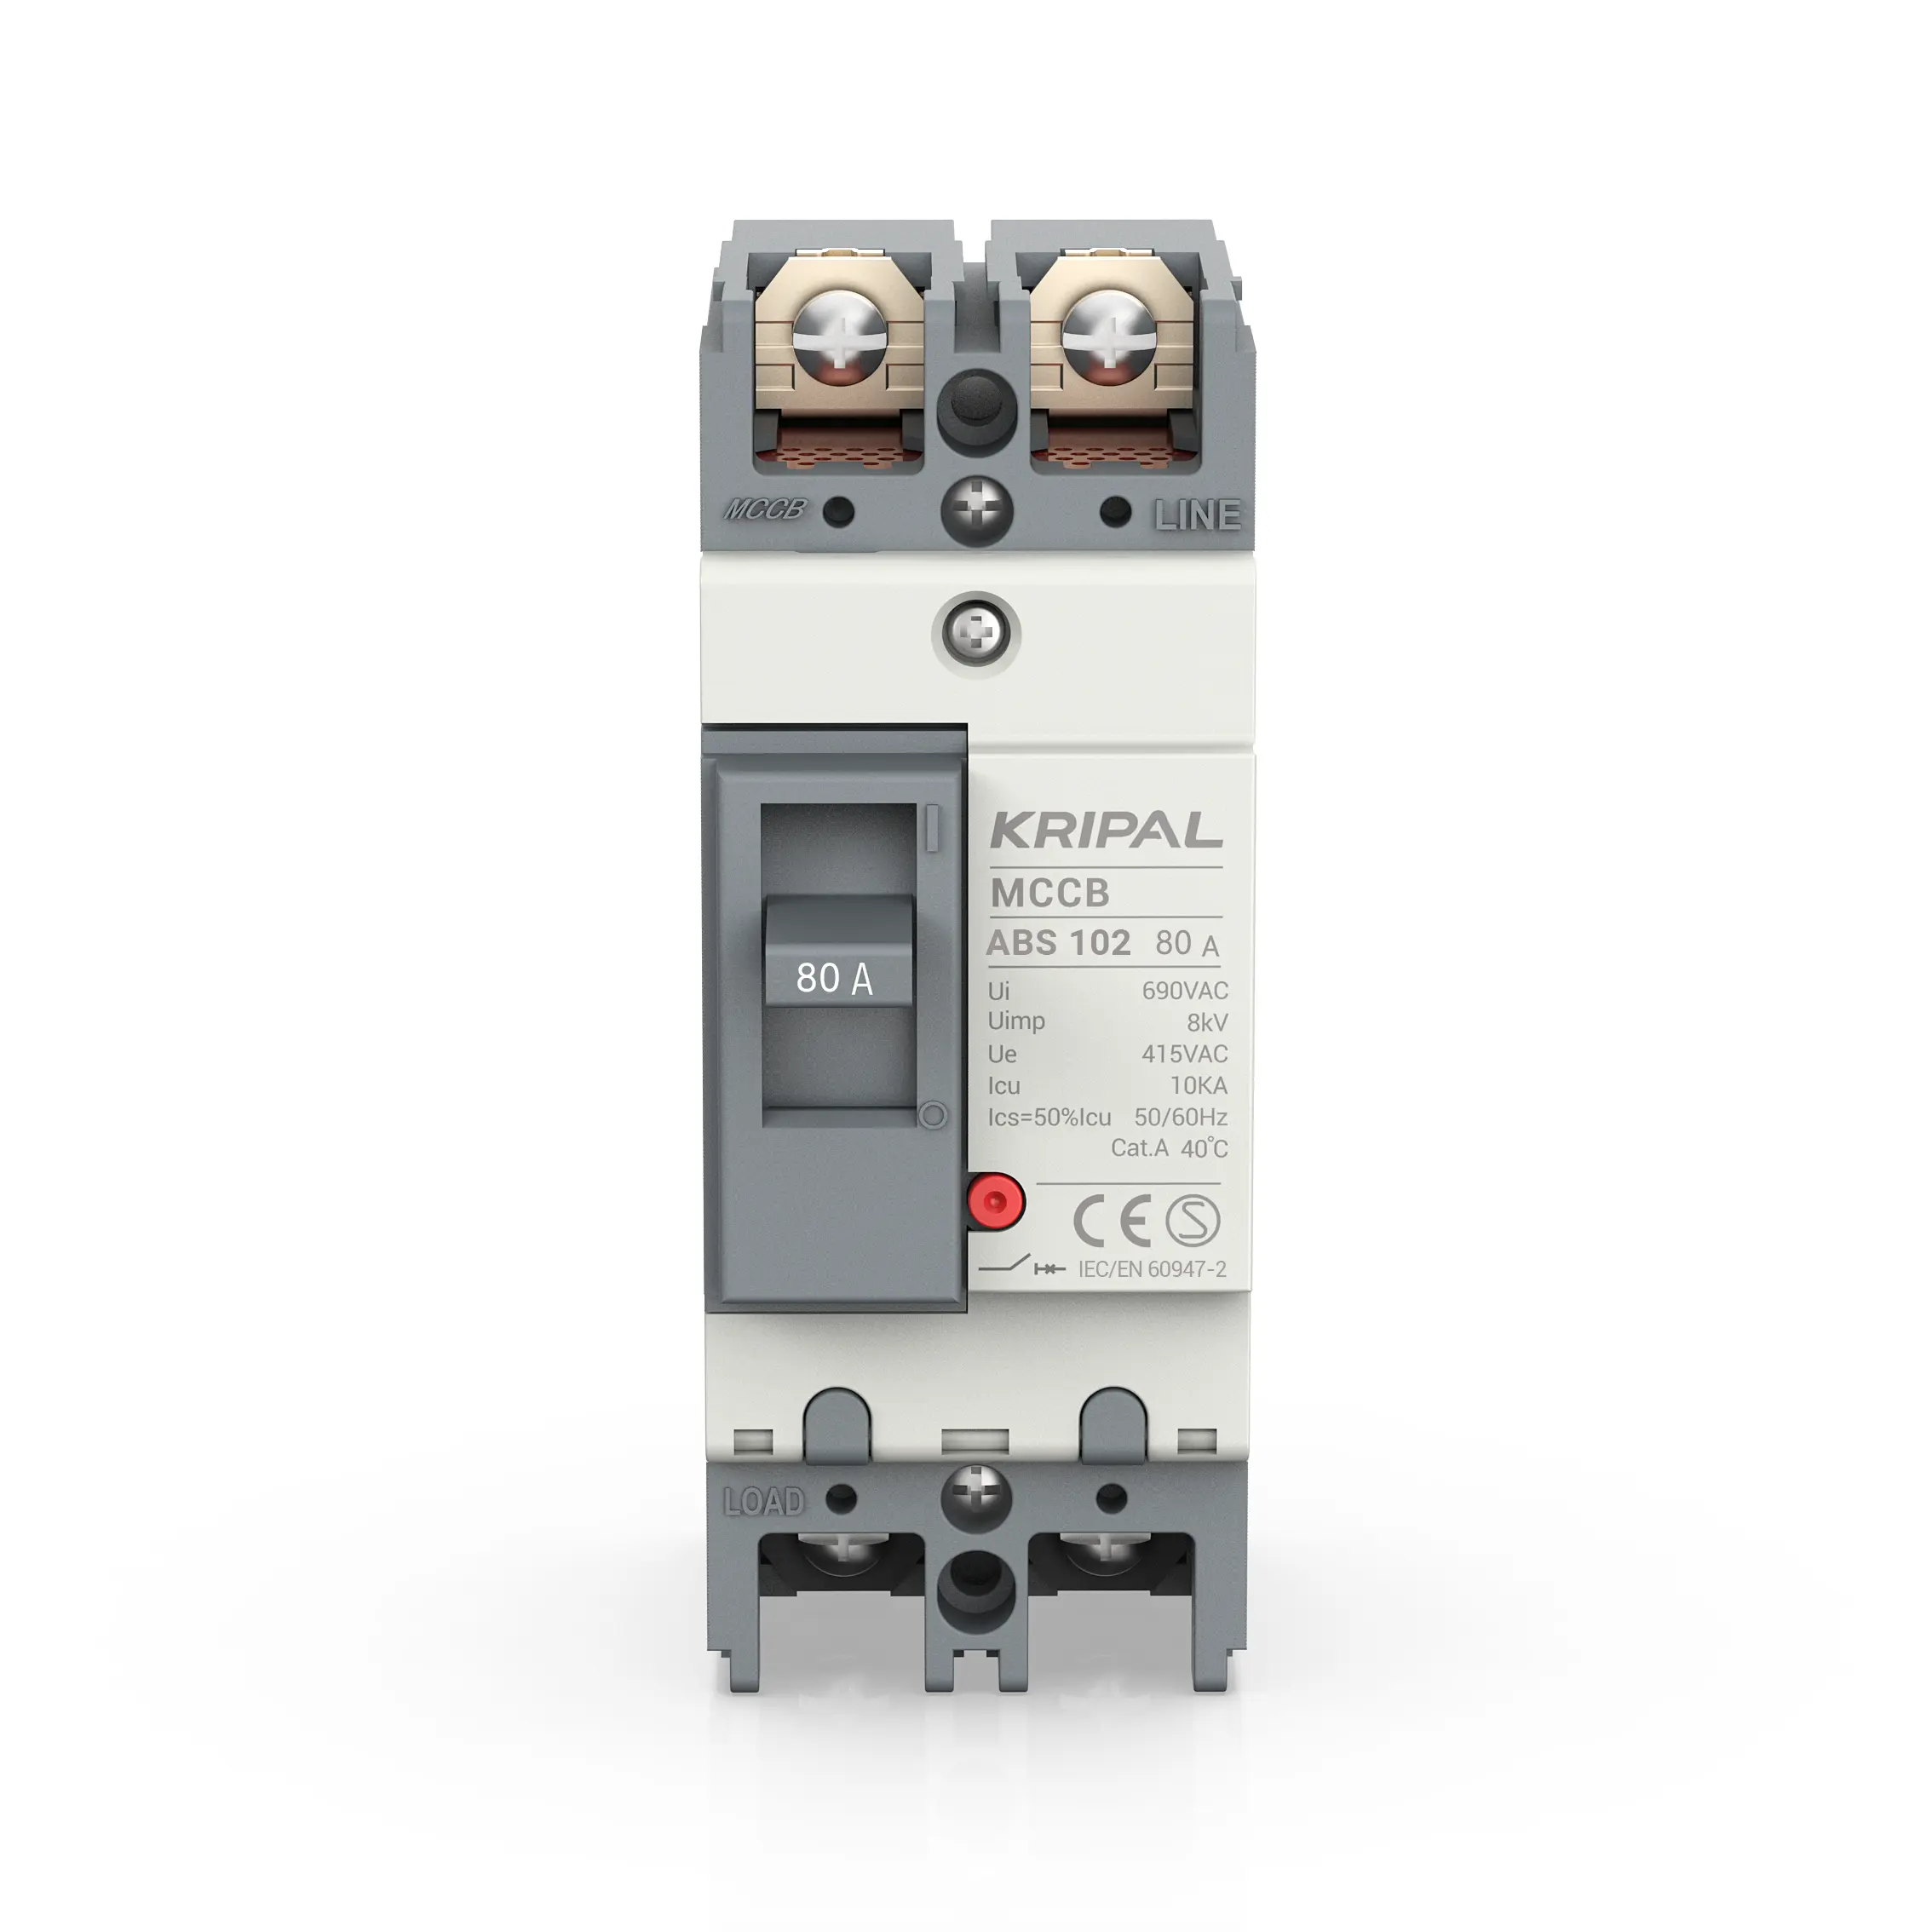 Kripal 80a Mccb Enclosure 80amp Abe Circuit Breaker 380v 3phase Breakers Circuit Box with Current Protection Function